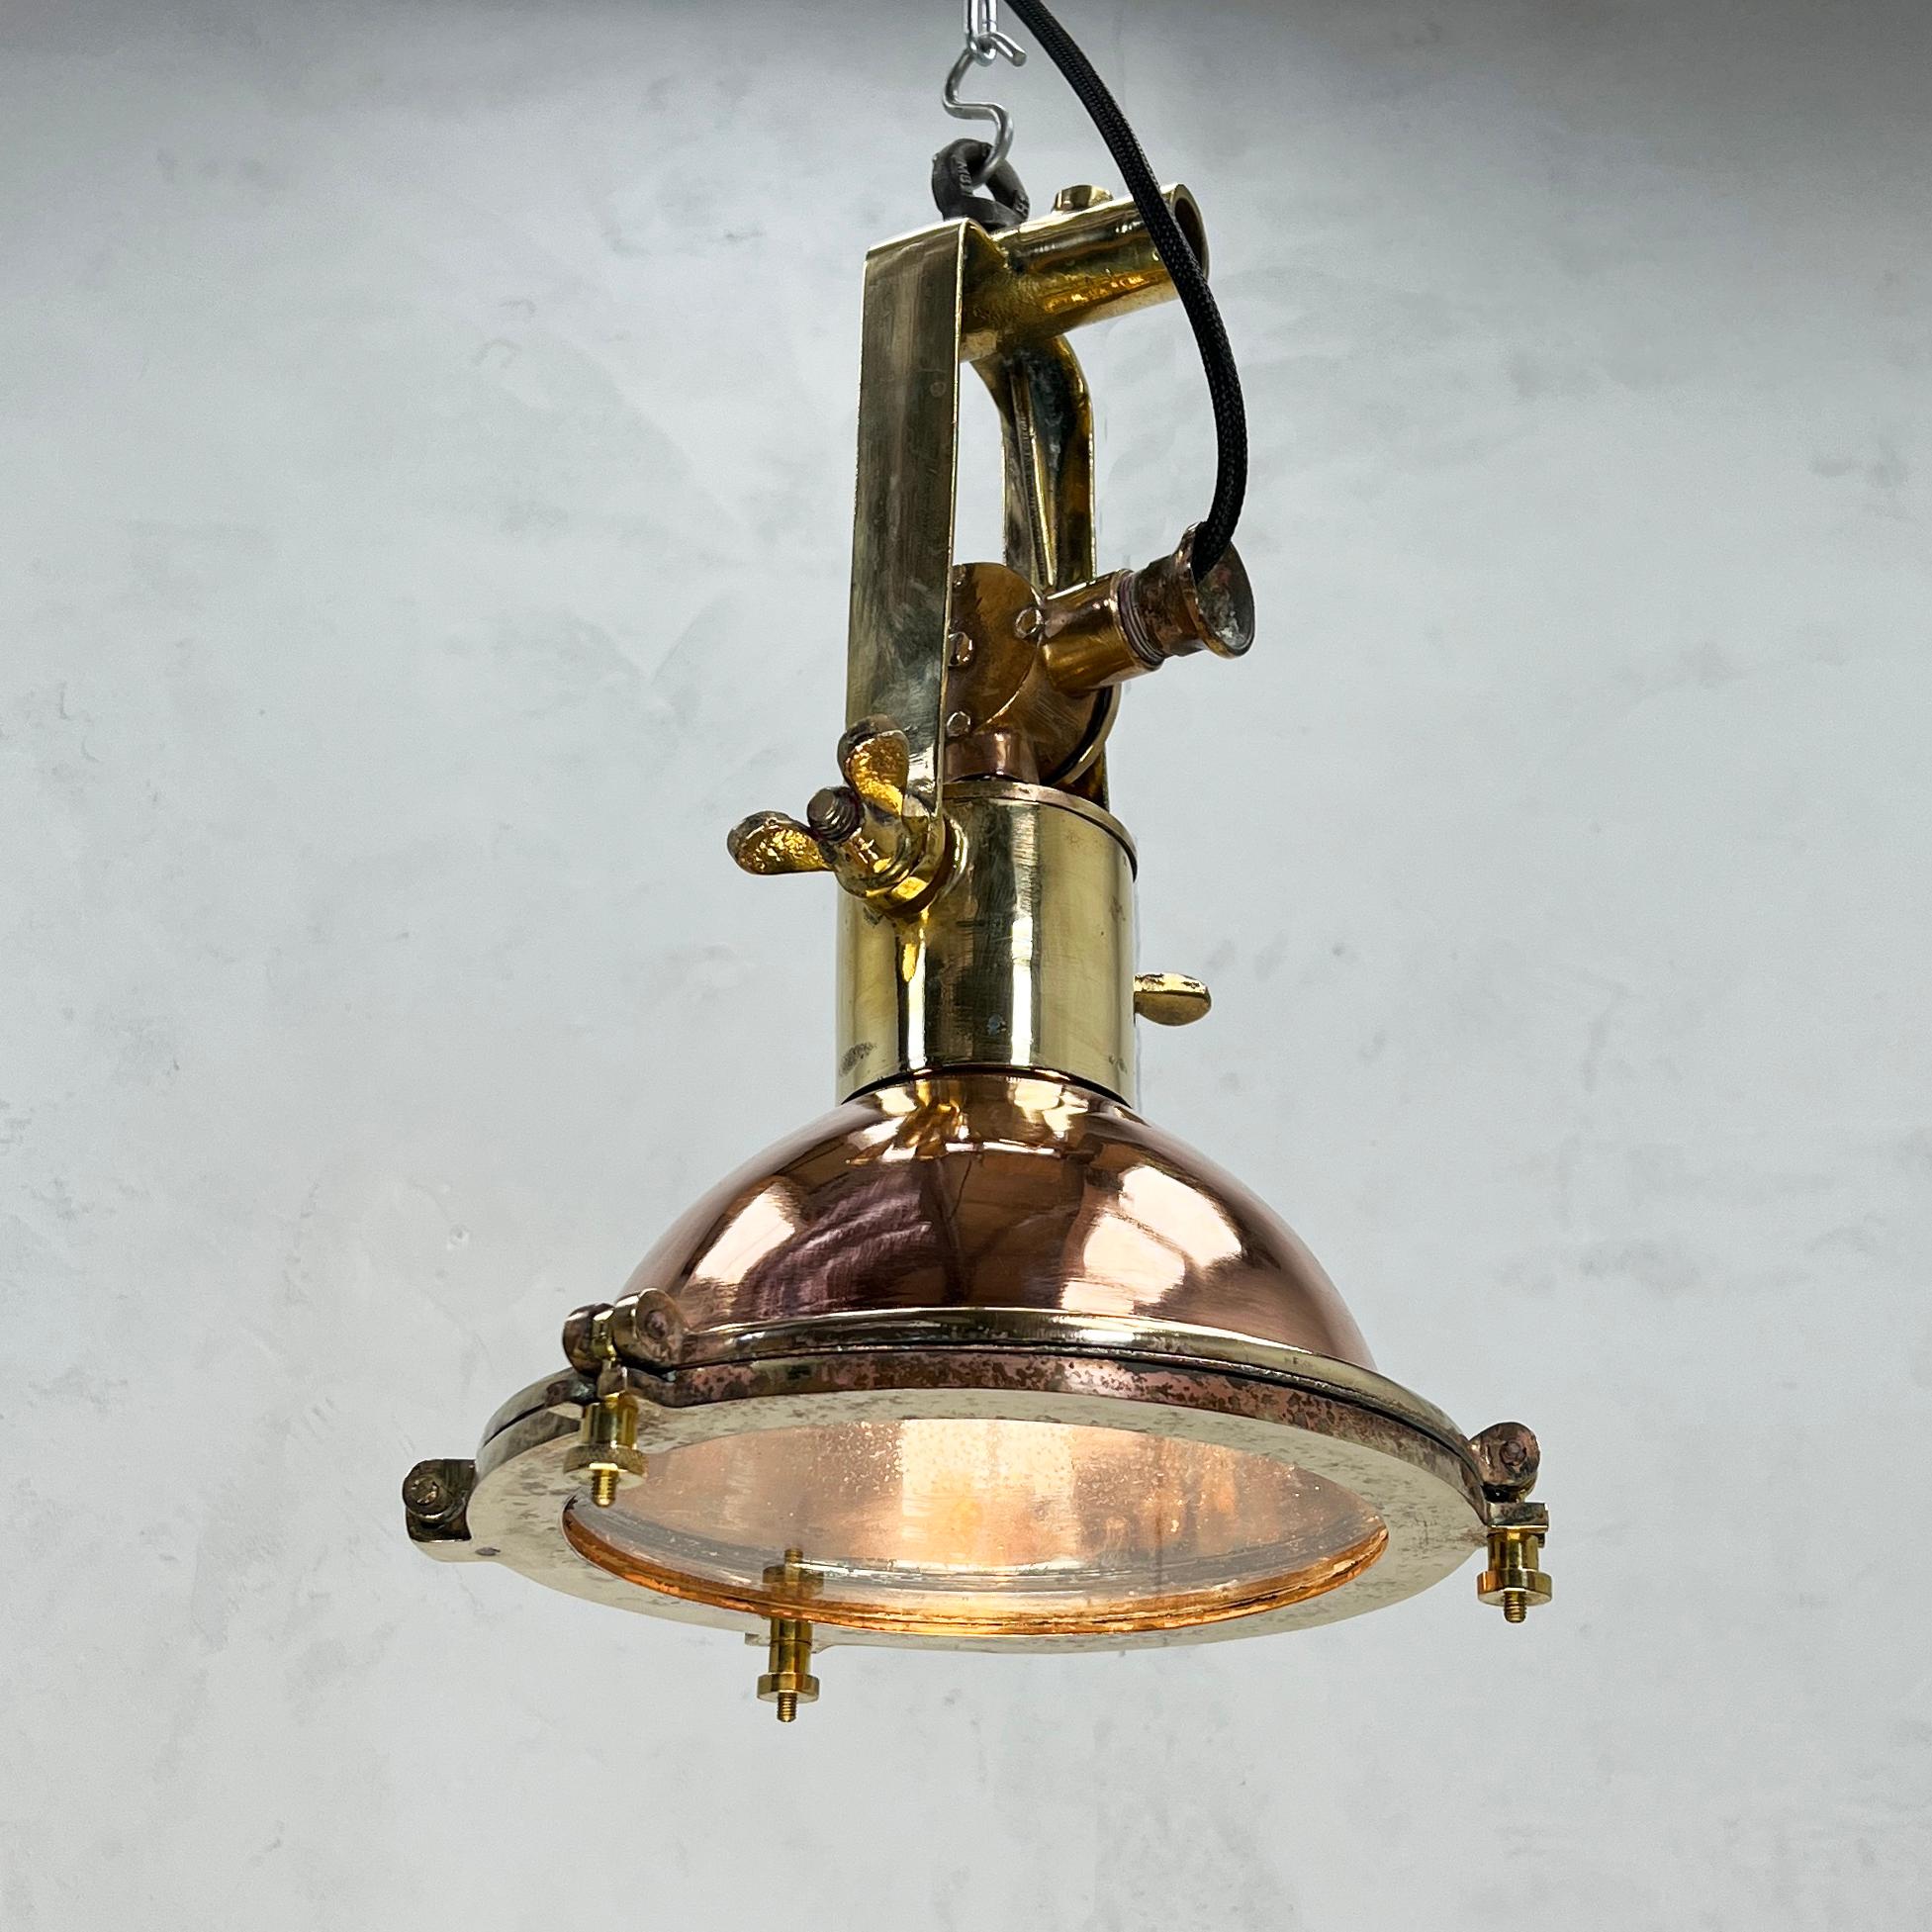 These small copper and brass ceiling lights are original marine light fixtures reclaimed and professionally restored by hand. Made by Wiska, a German manufacturer of industrial grade fixtures & fittings. 

1 metre of braided cable and hanging chain